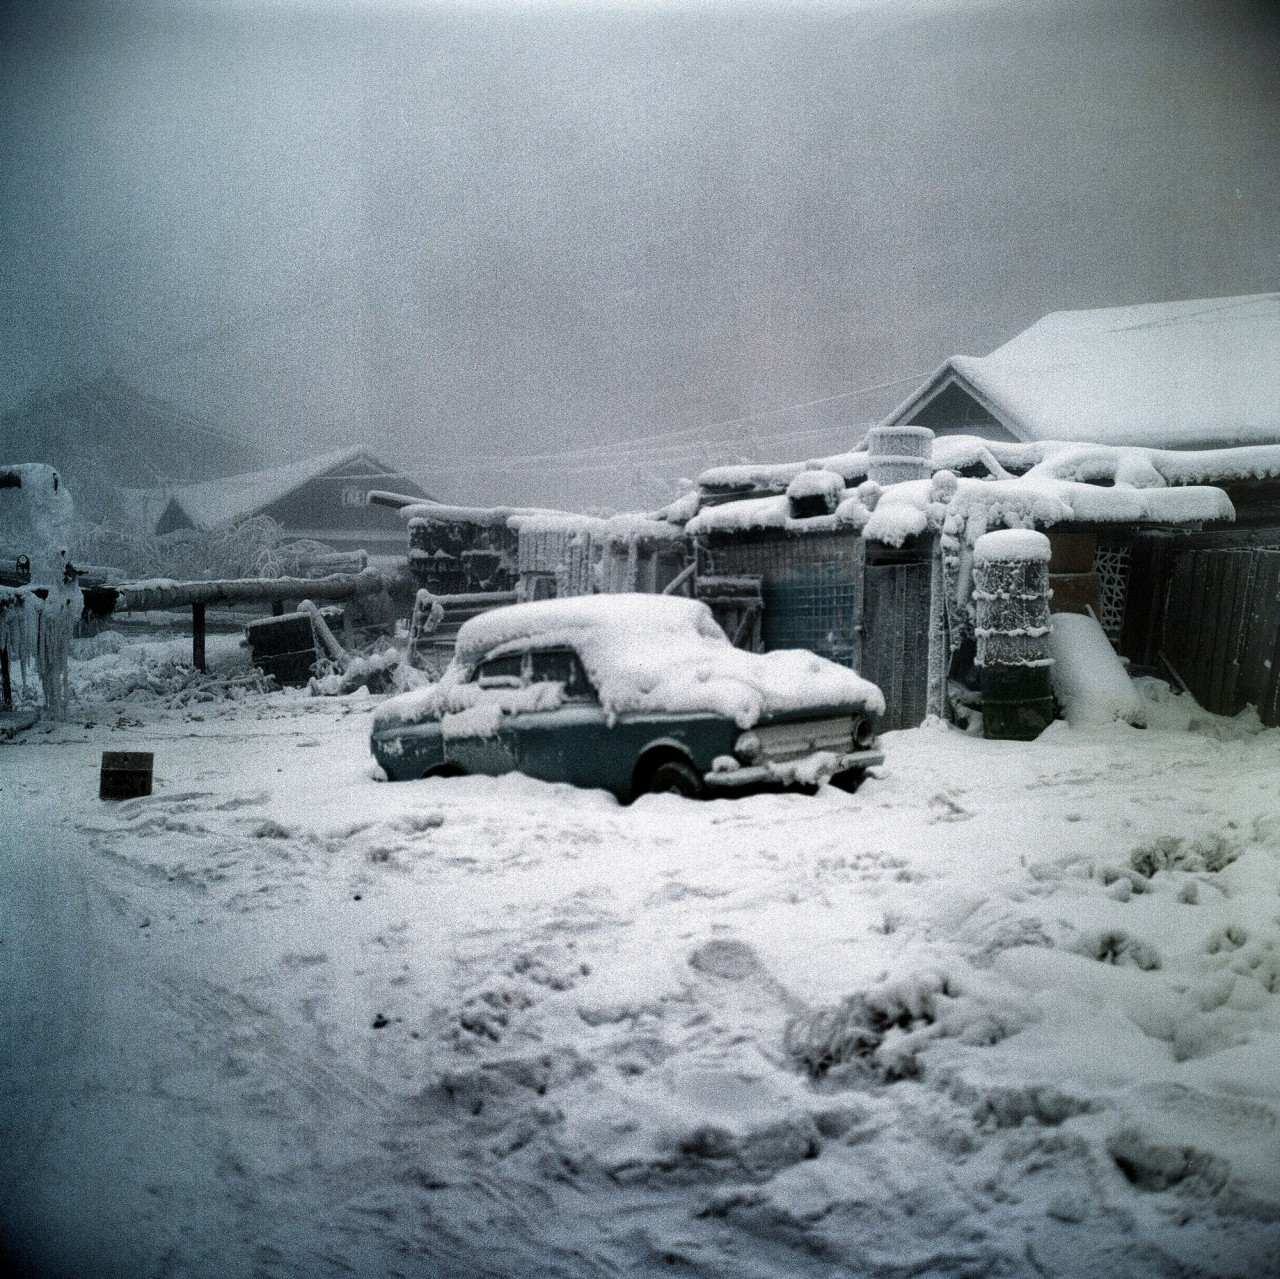 Canada's coldest day and bone-chilling beauty: A frozen tale from the 1947 winter in Snag, Yukon 16